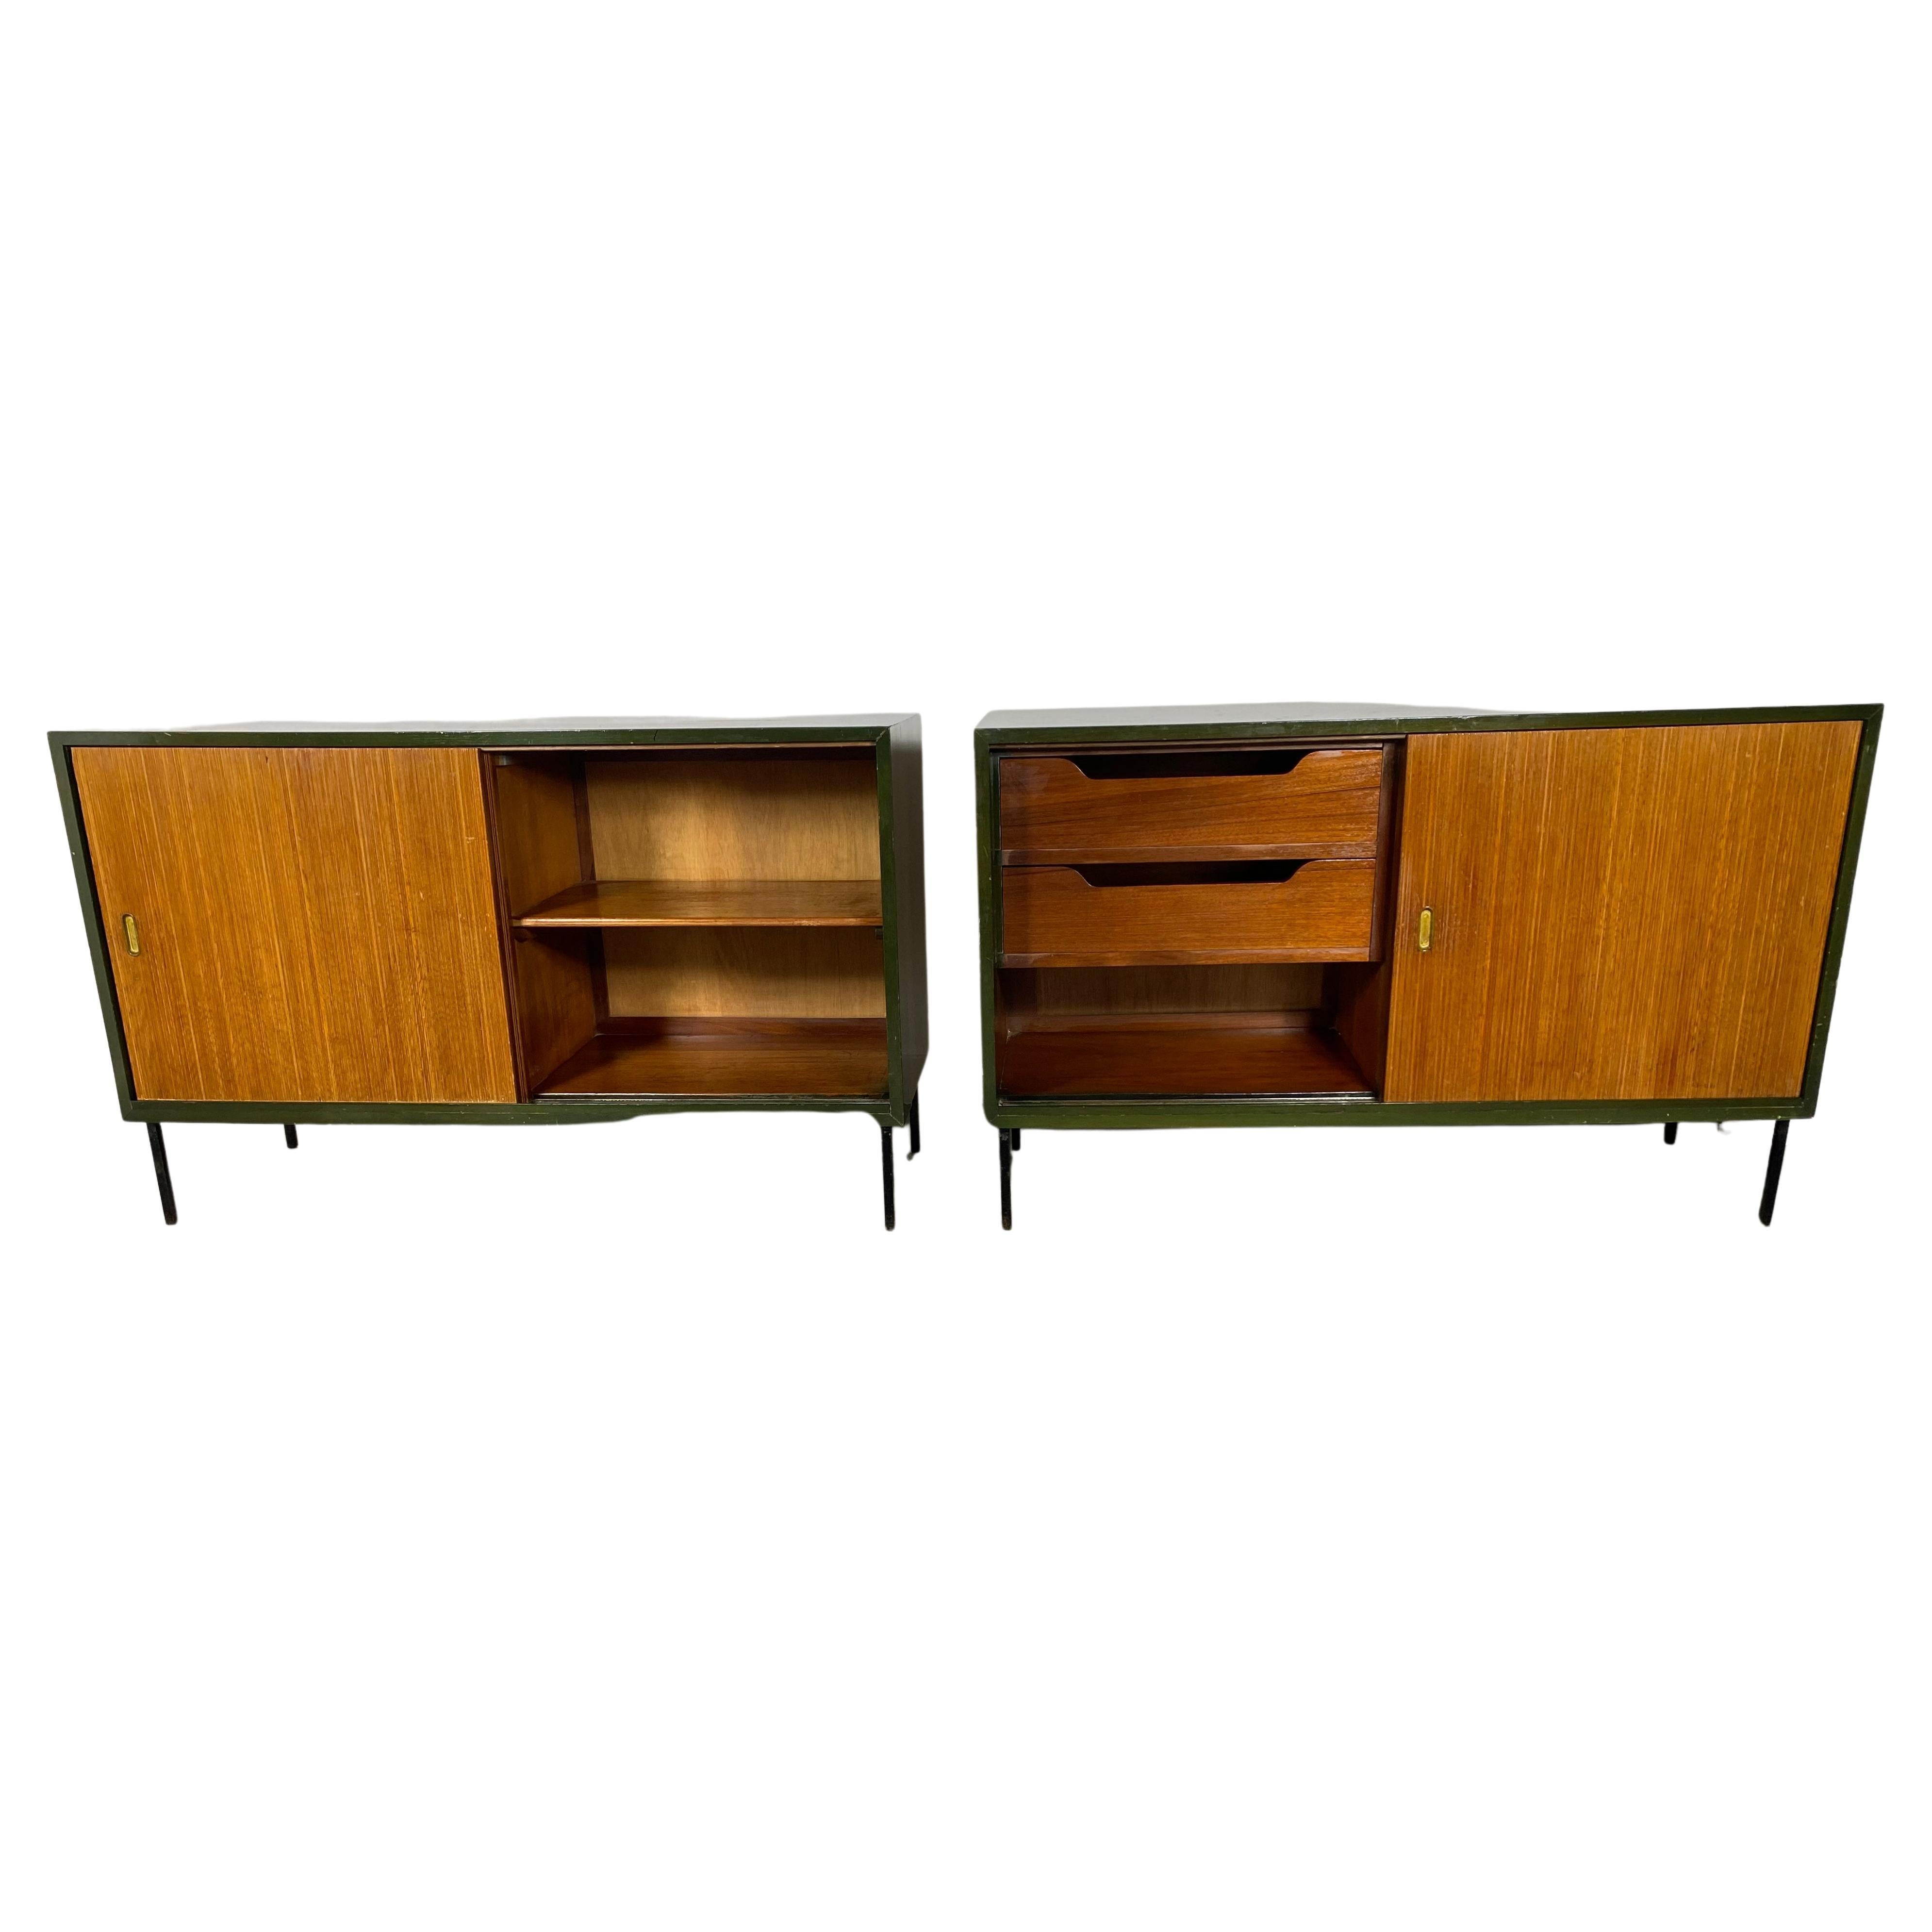 Interplan Unit 'K' Lacquered Sideboard by Robin Day for Hille, 1950s For Sale